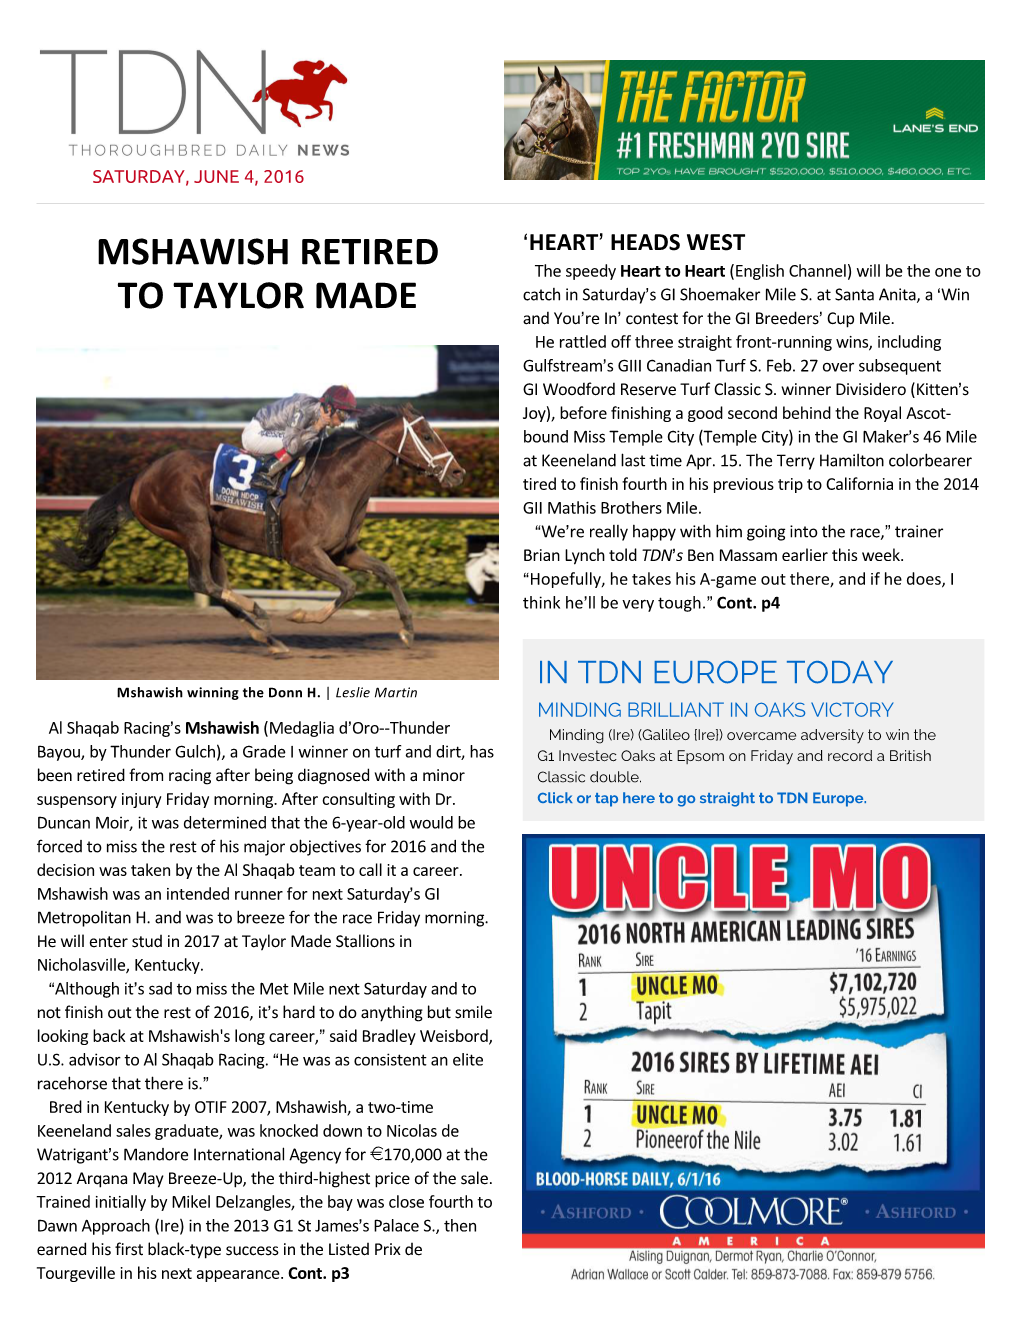 Mshawish Retired to Taylor Made